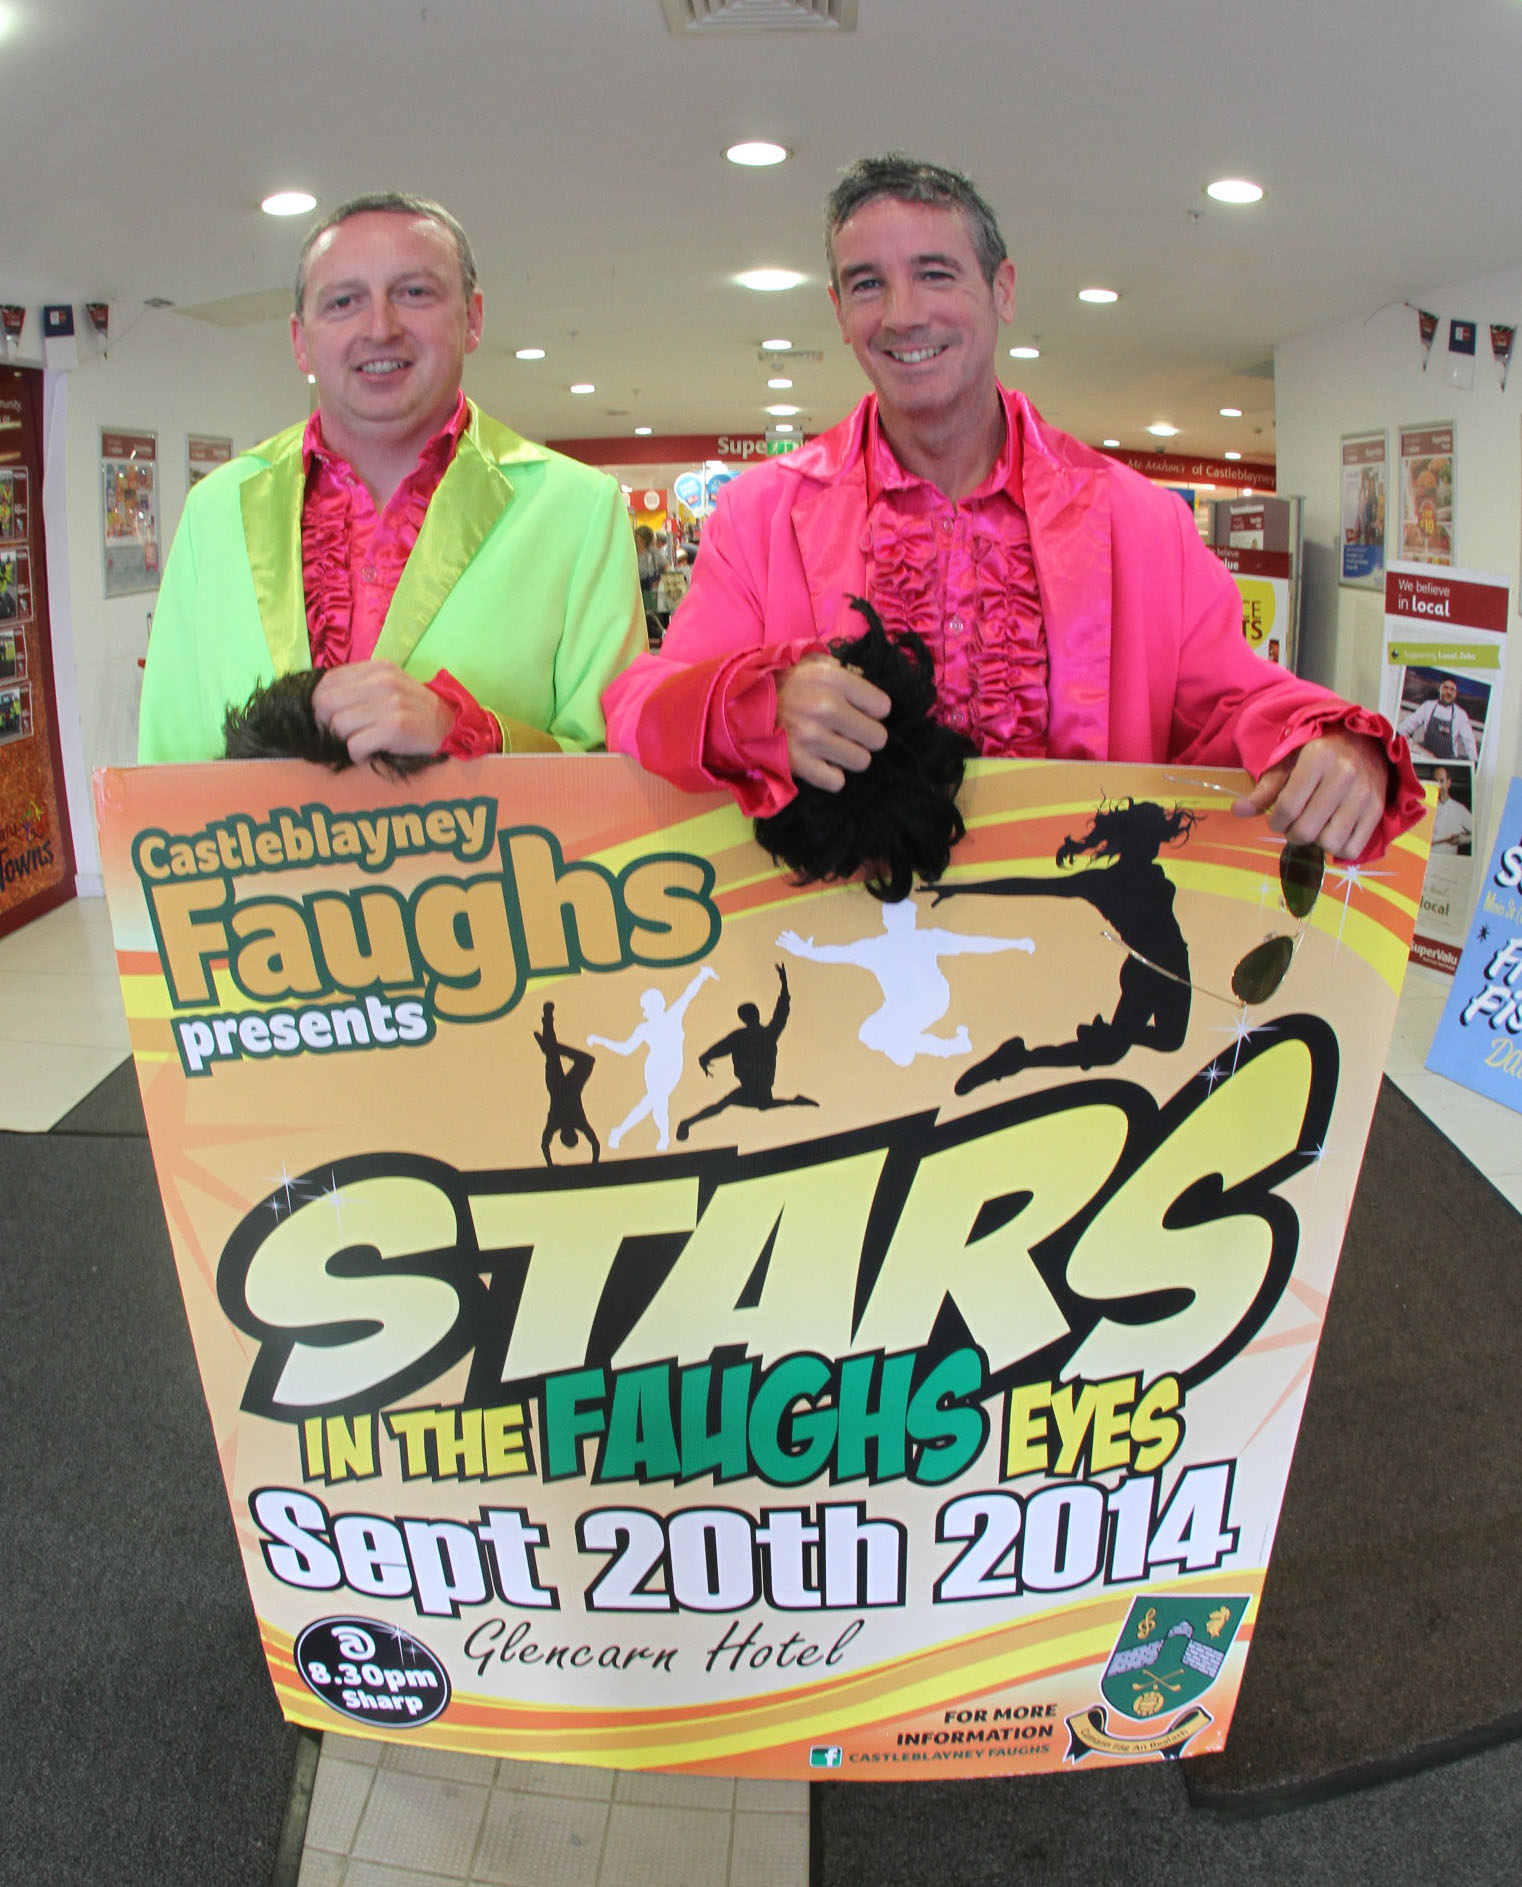 Stars in the Faughs Eyes – Support your favourite act!